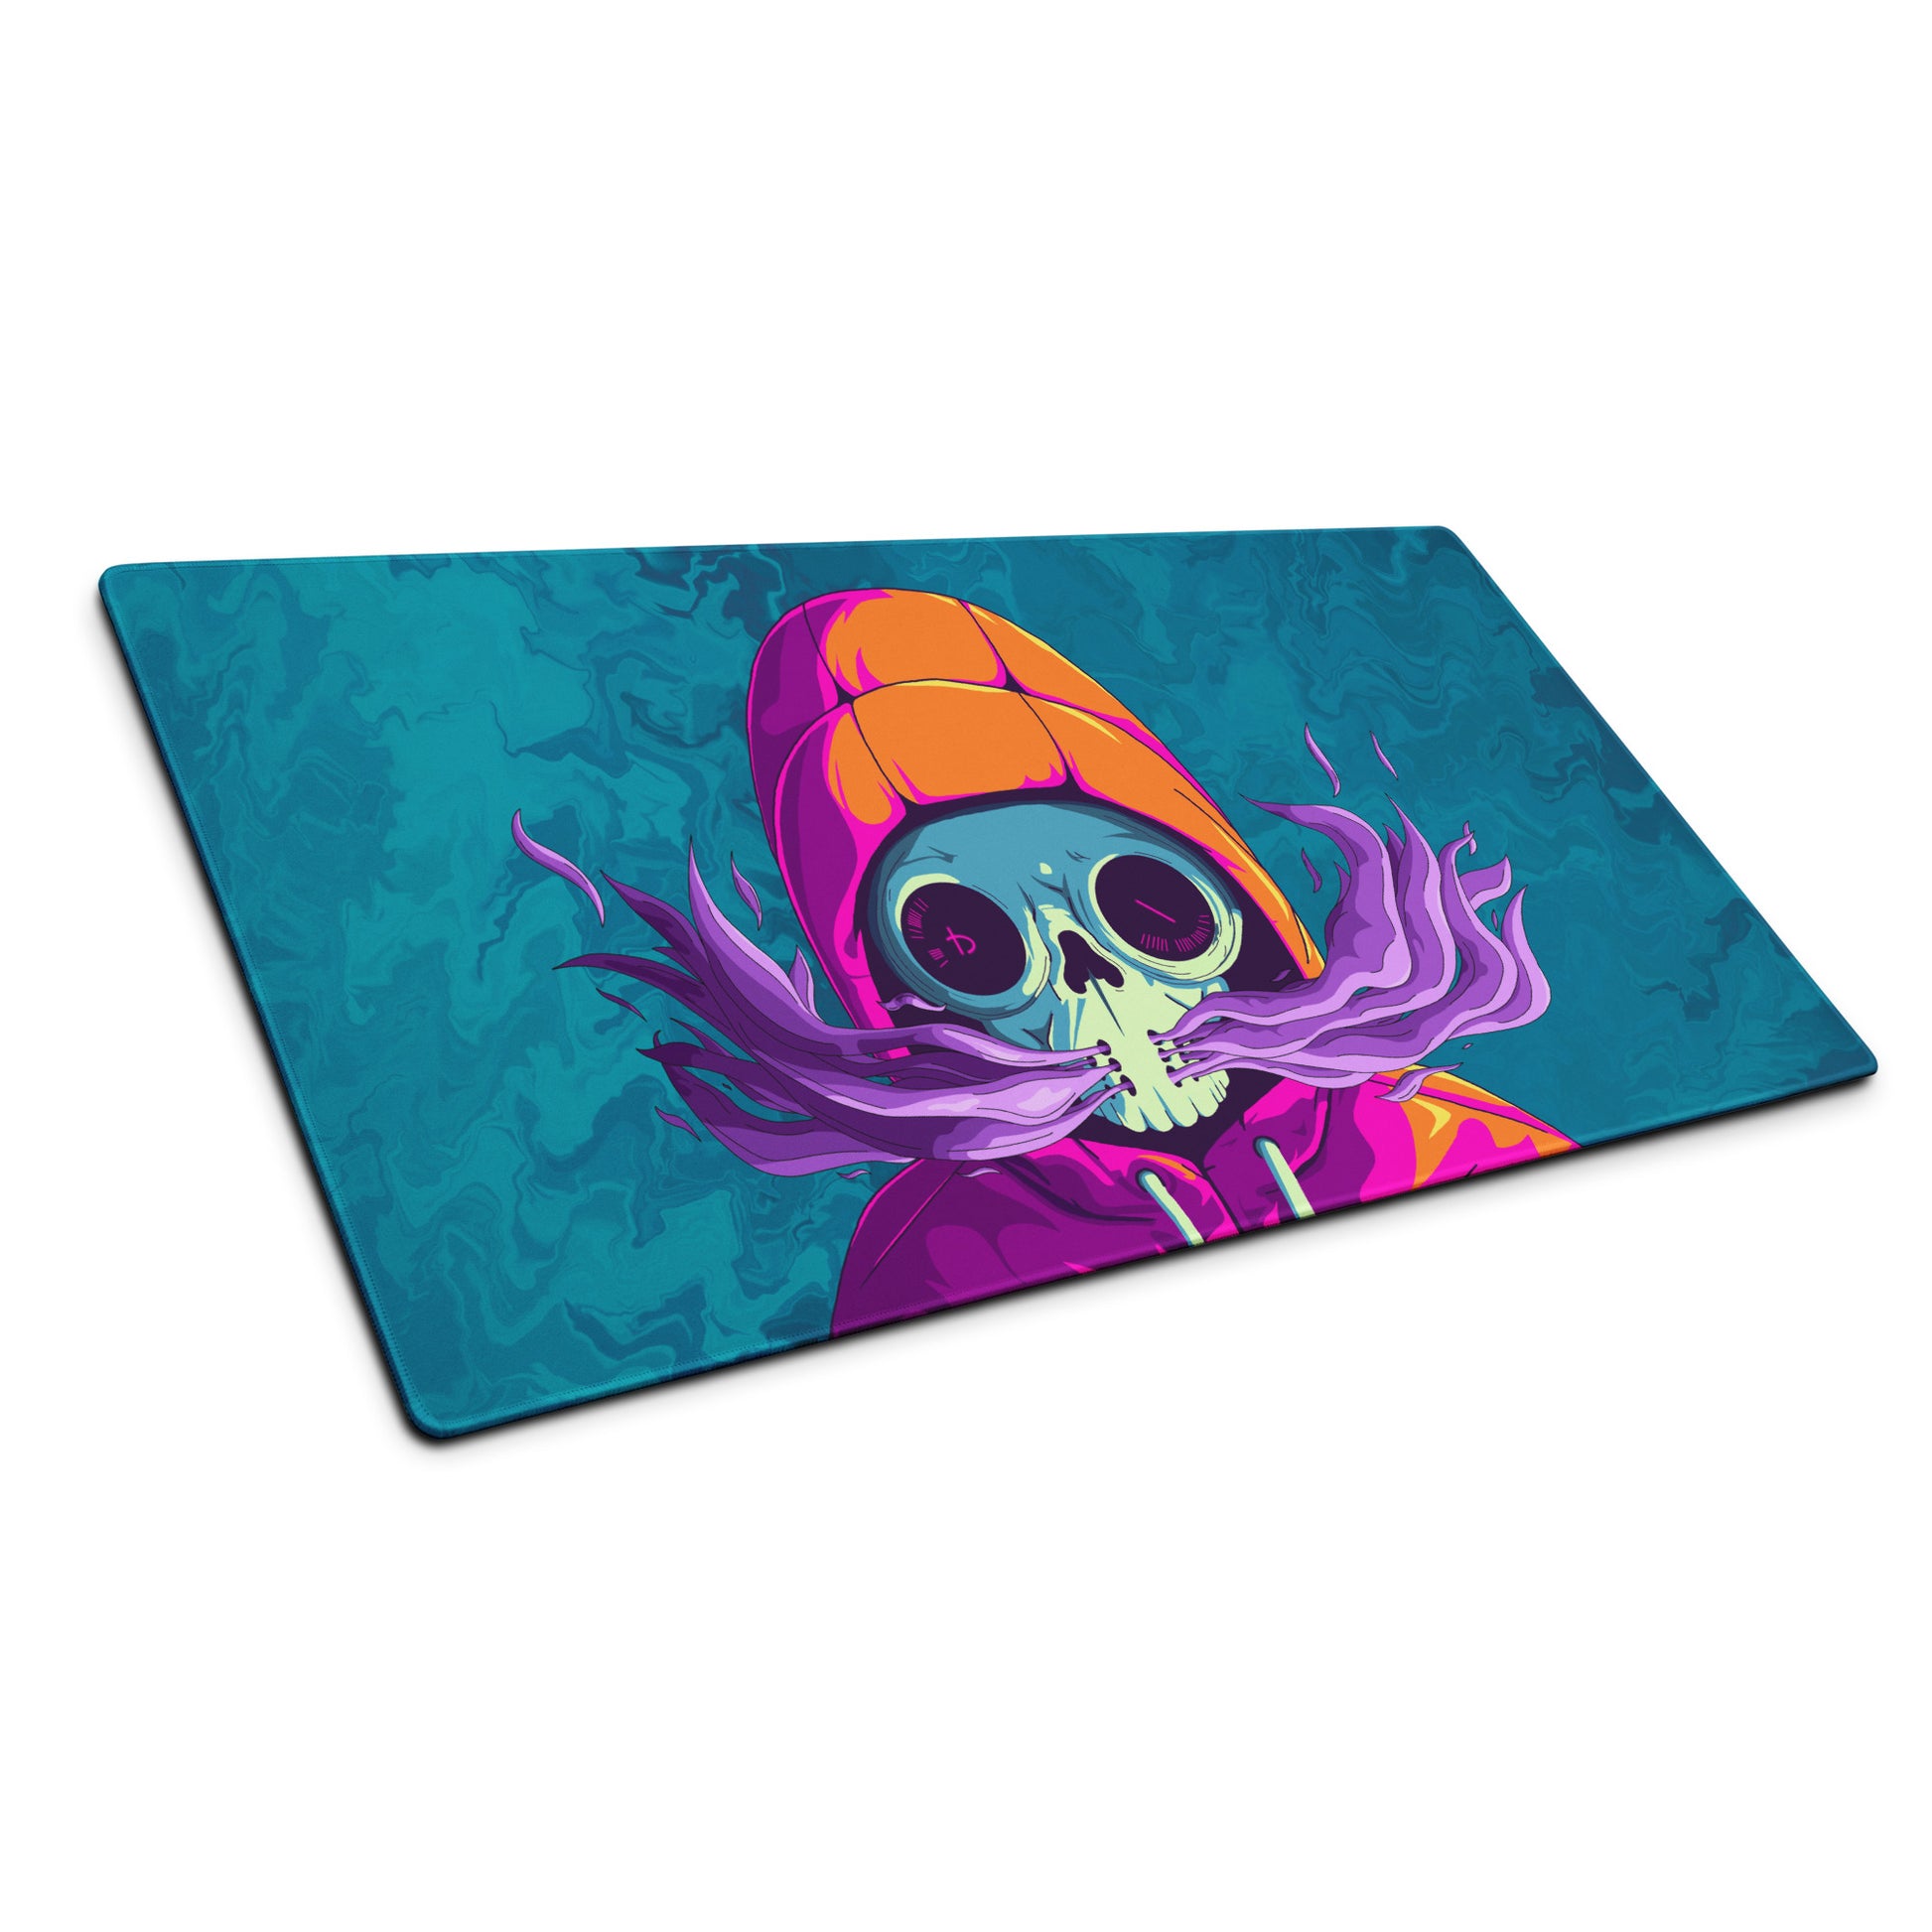 A 36" x 18" desk pad with a man wearing a skull gas mask breathing smoke out from it shown at an angle. Blue in color.